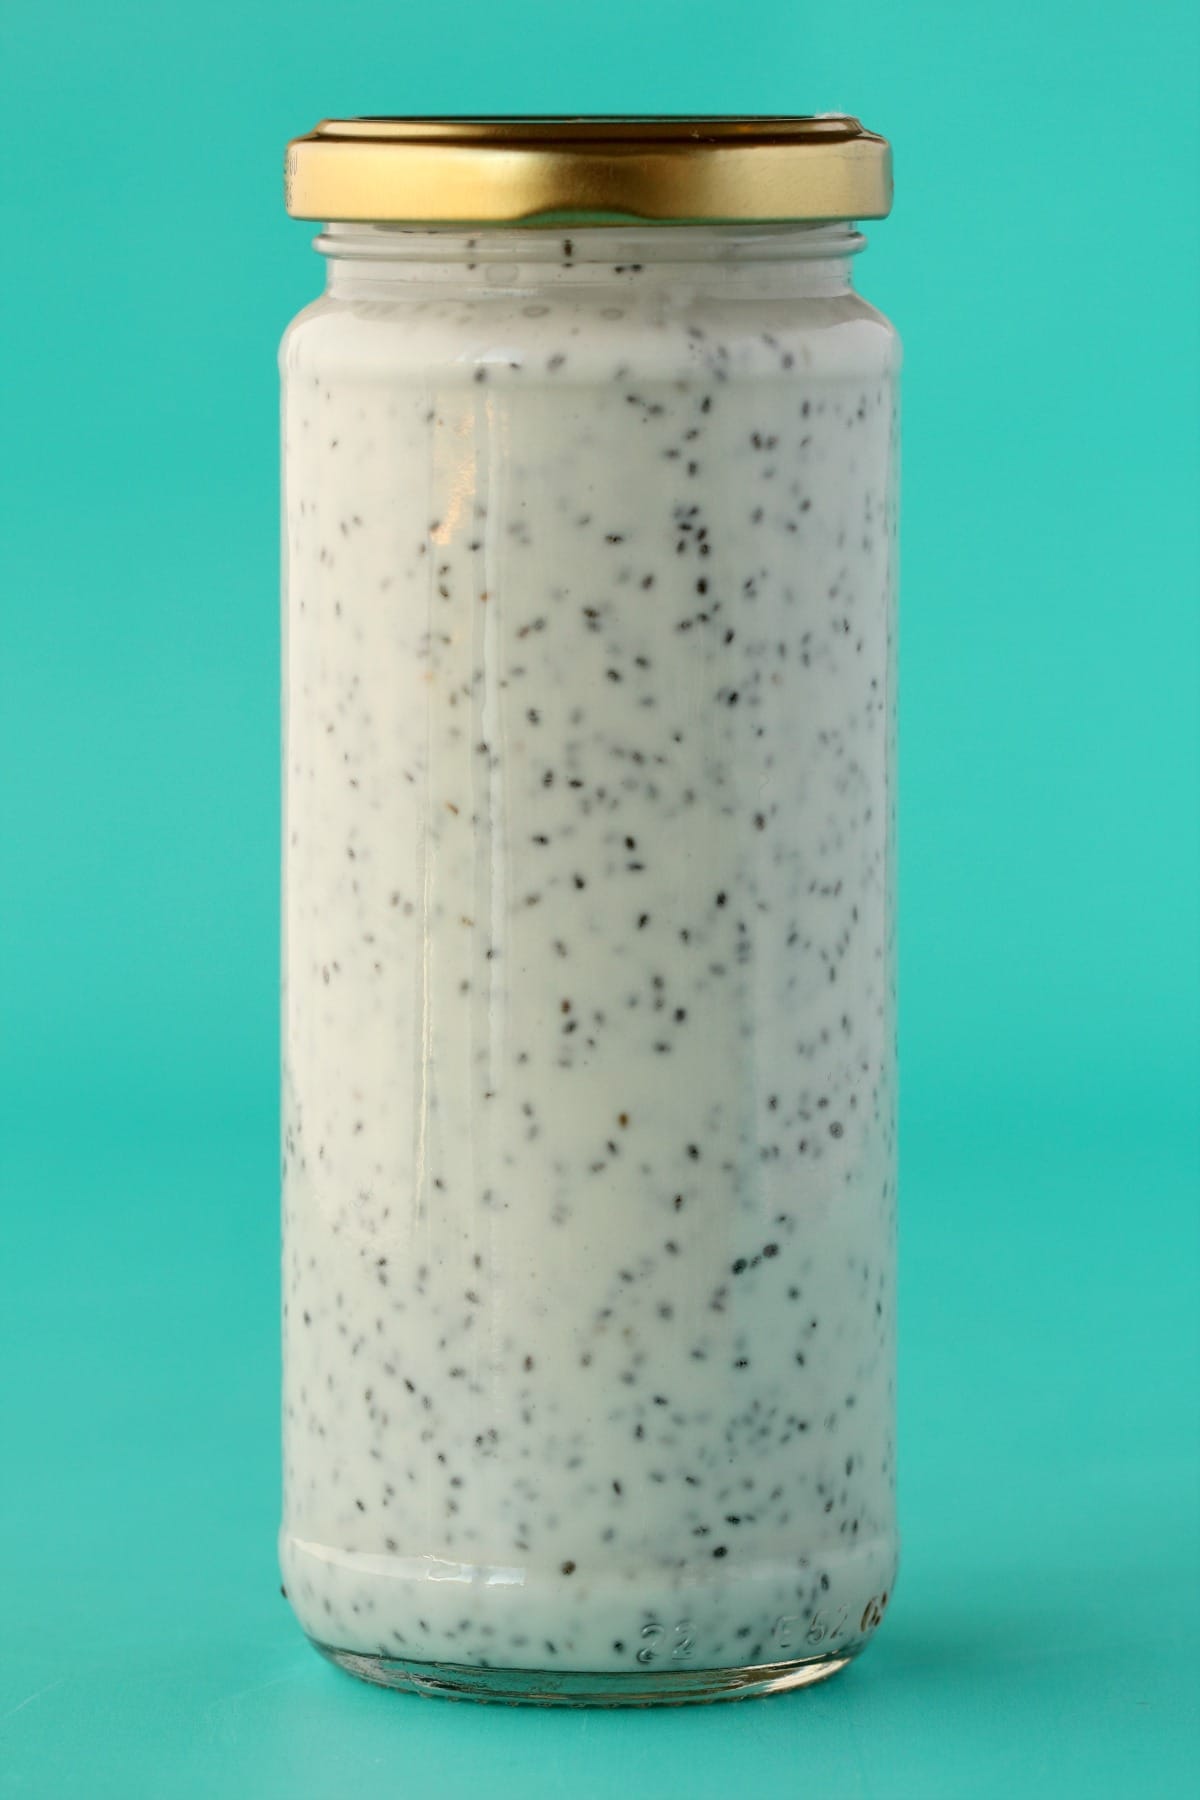 A mason jar filled with chia seeds and coconut cream.